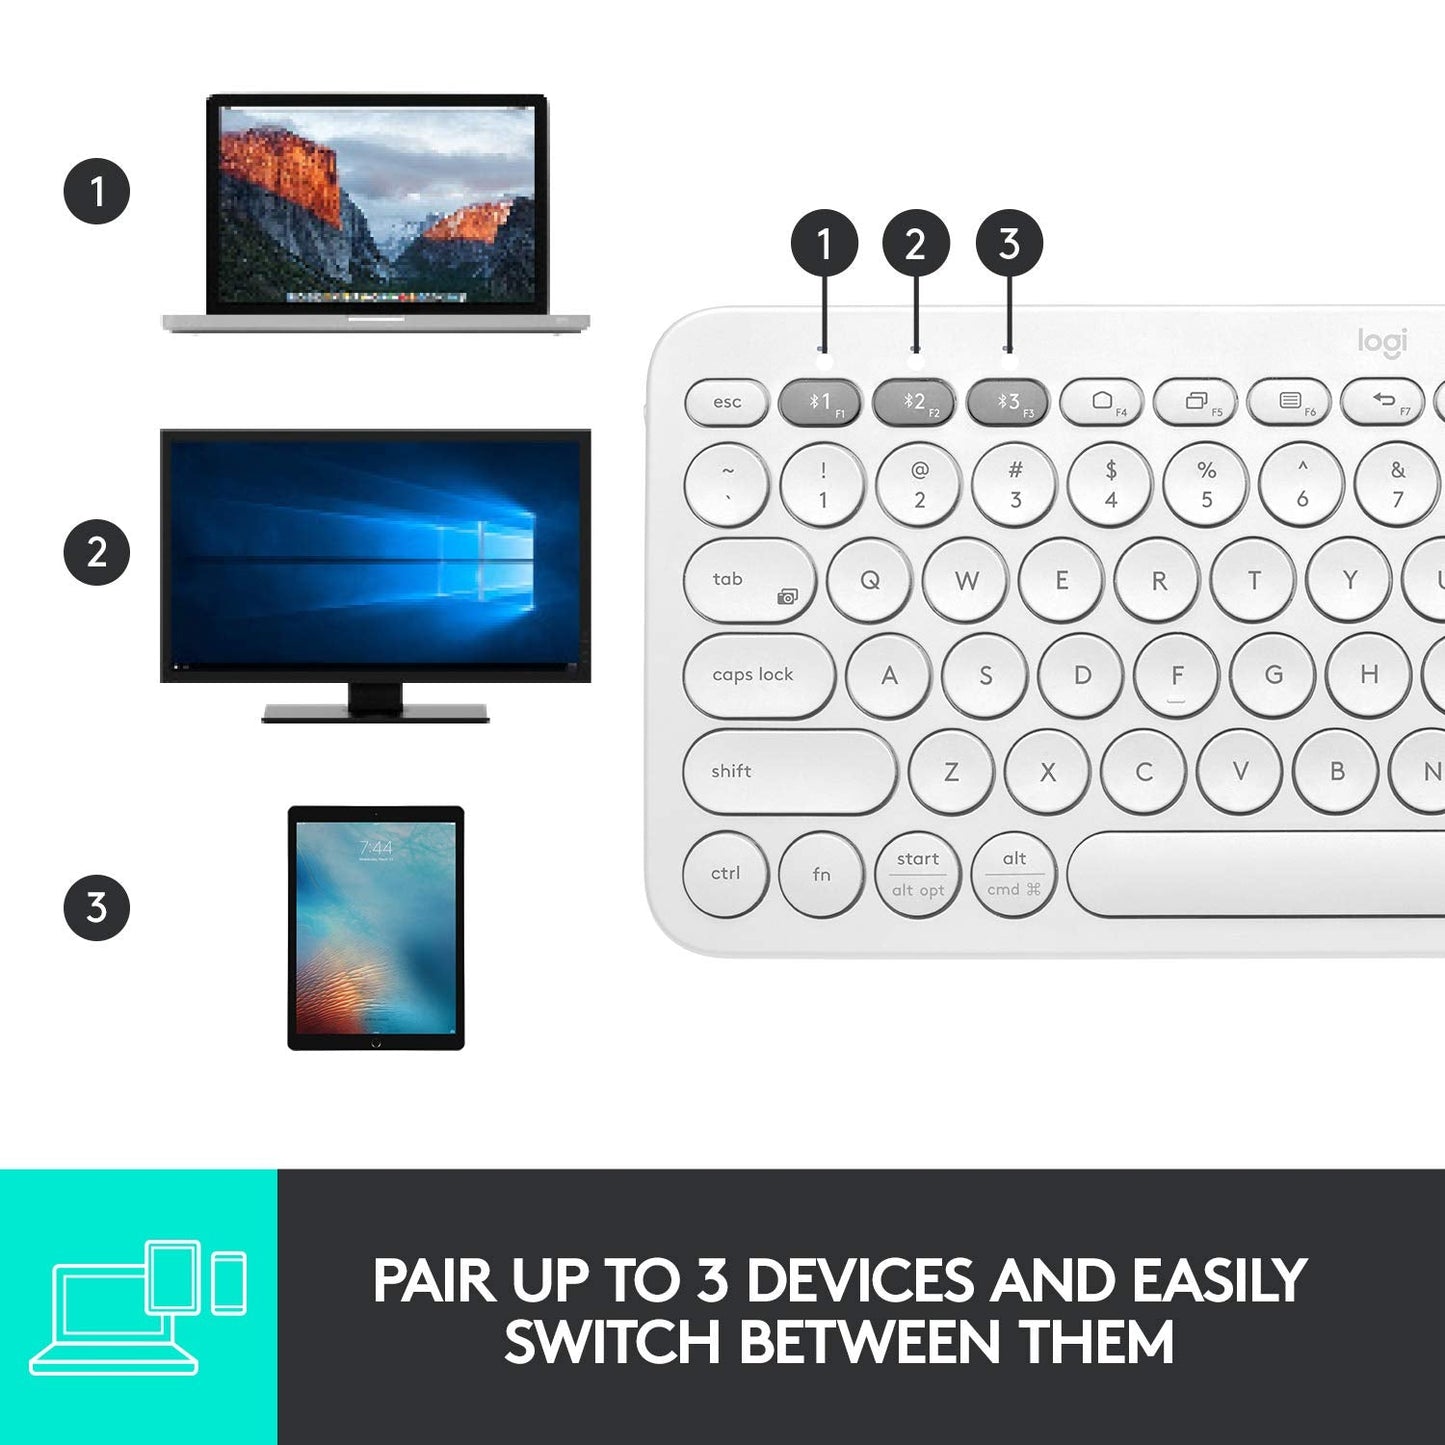 [RePacked] Logitech K380 Bluetooth Wireless Multi-Device Black Keyboard with Up to 3 Devices Connectivity and 2 Year Battery Life